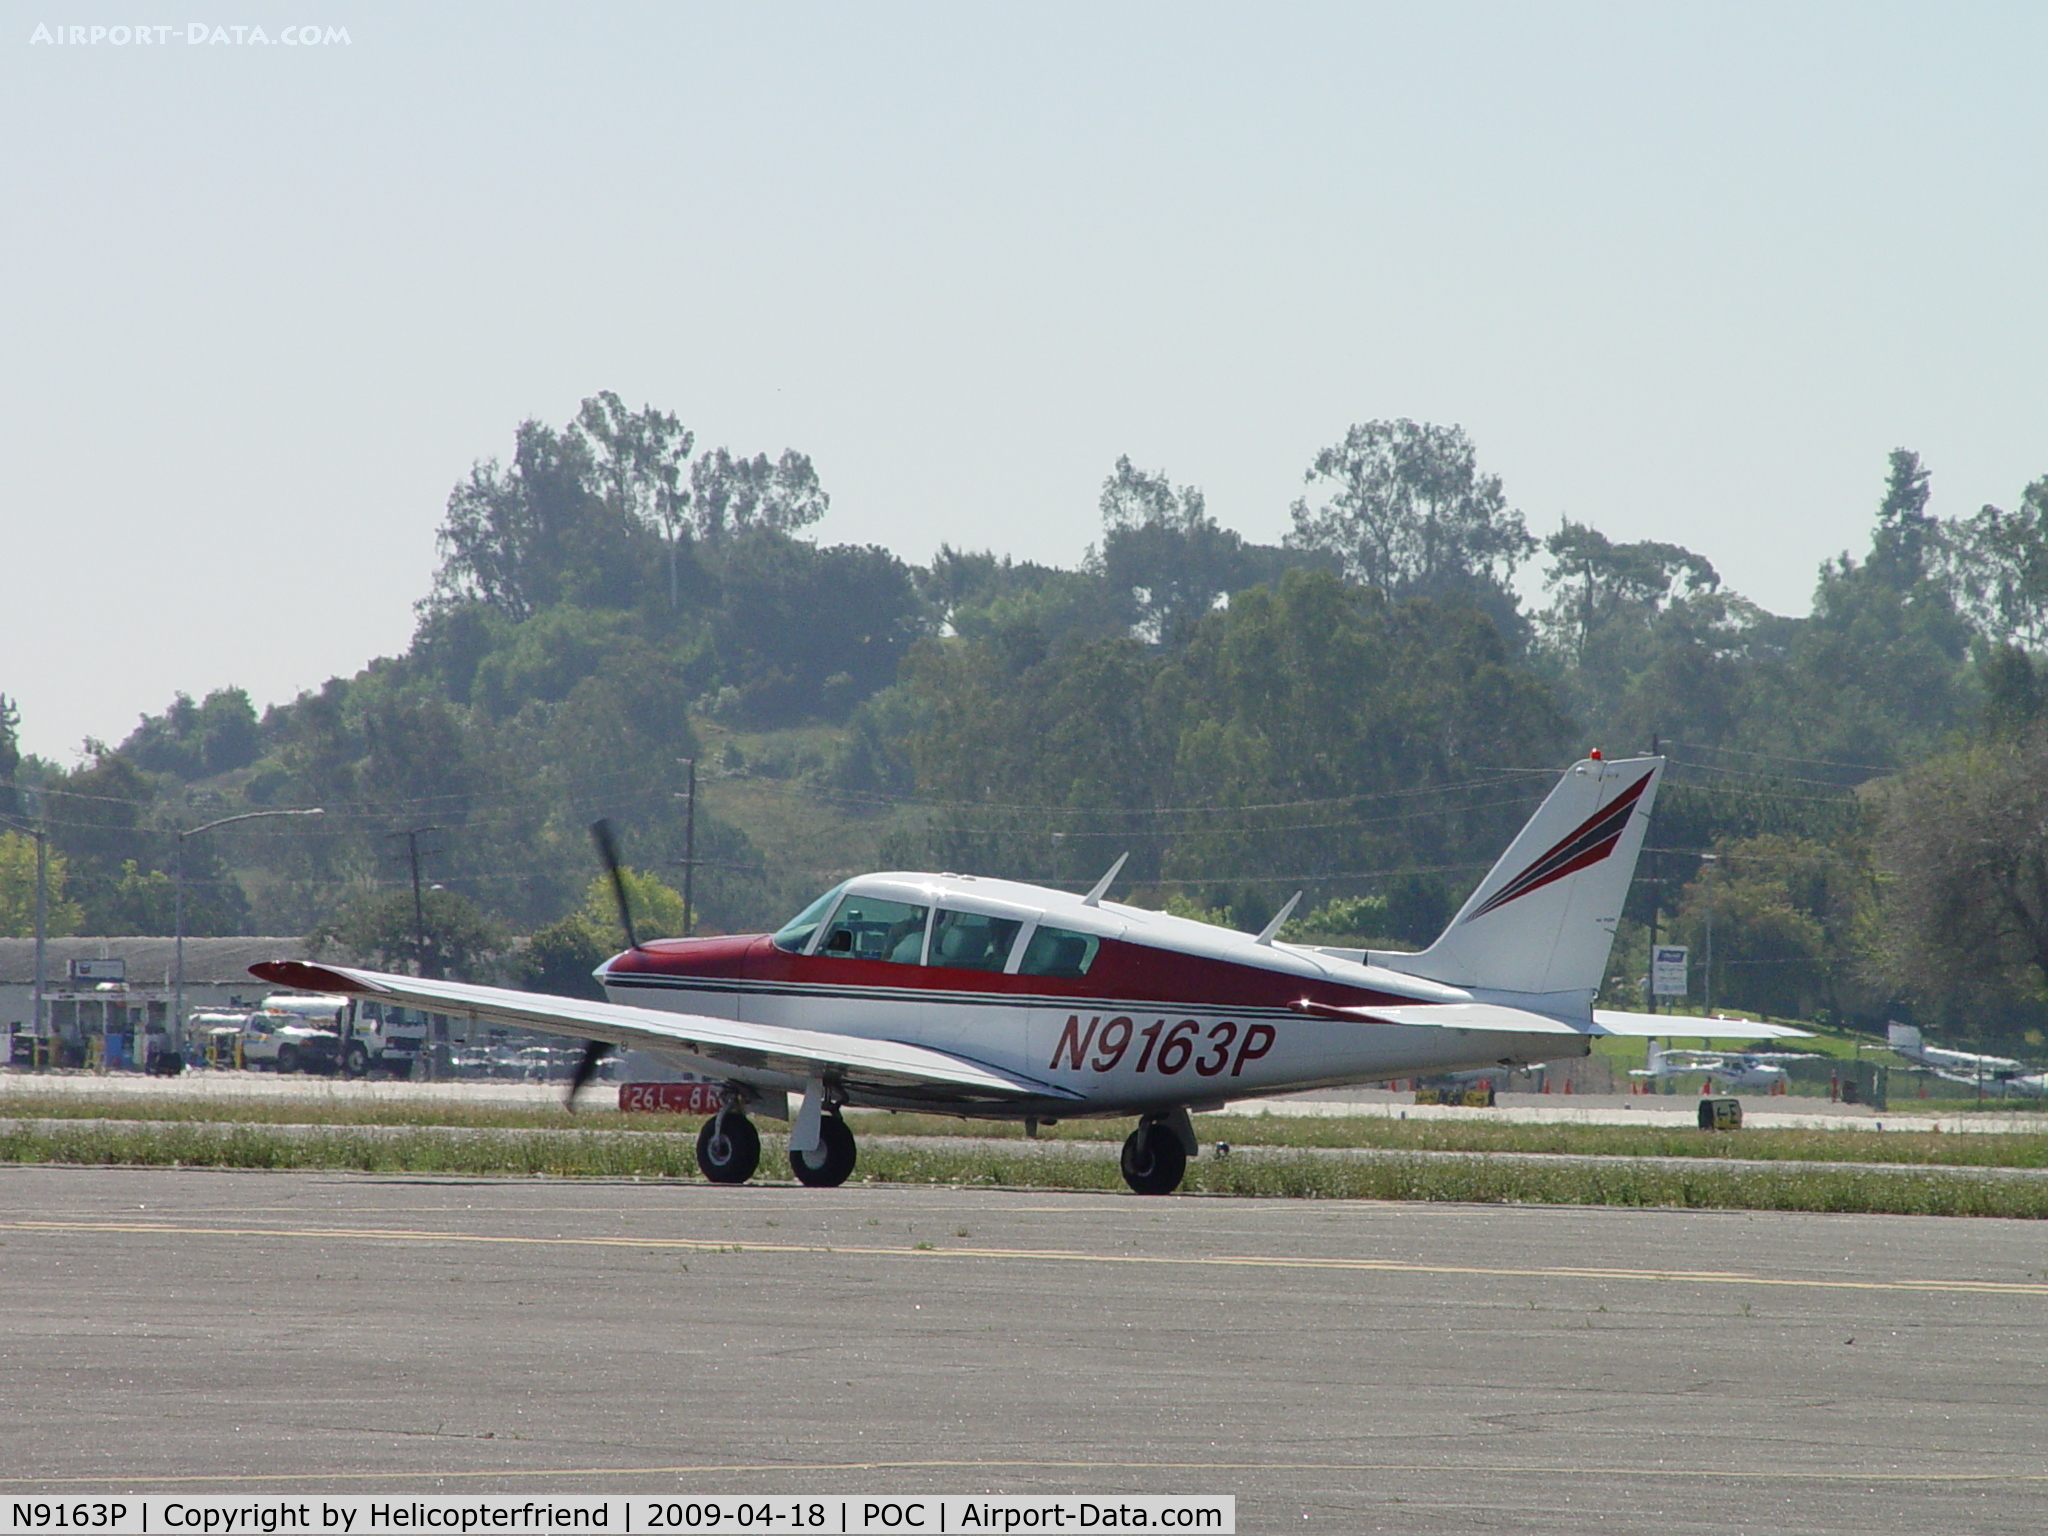 N9163P, 1966 Piper PA-24-260 C/N 24-4651, Taxiing for take off at 26R